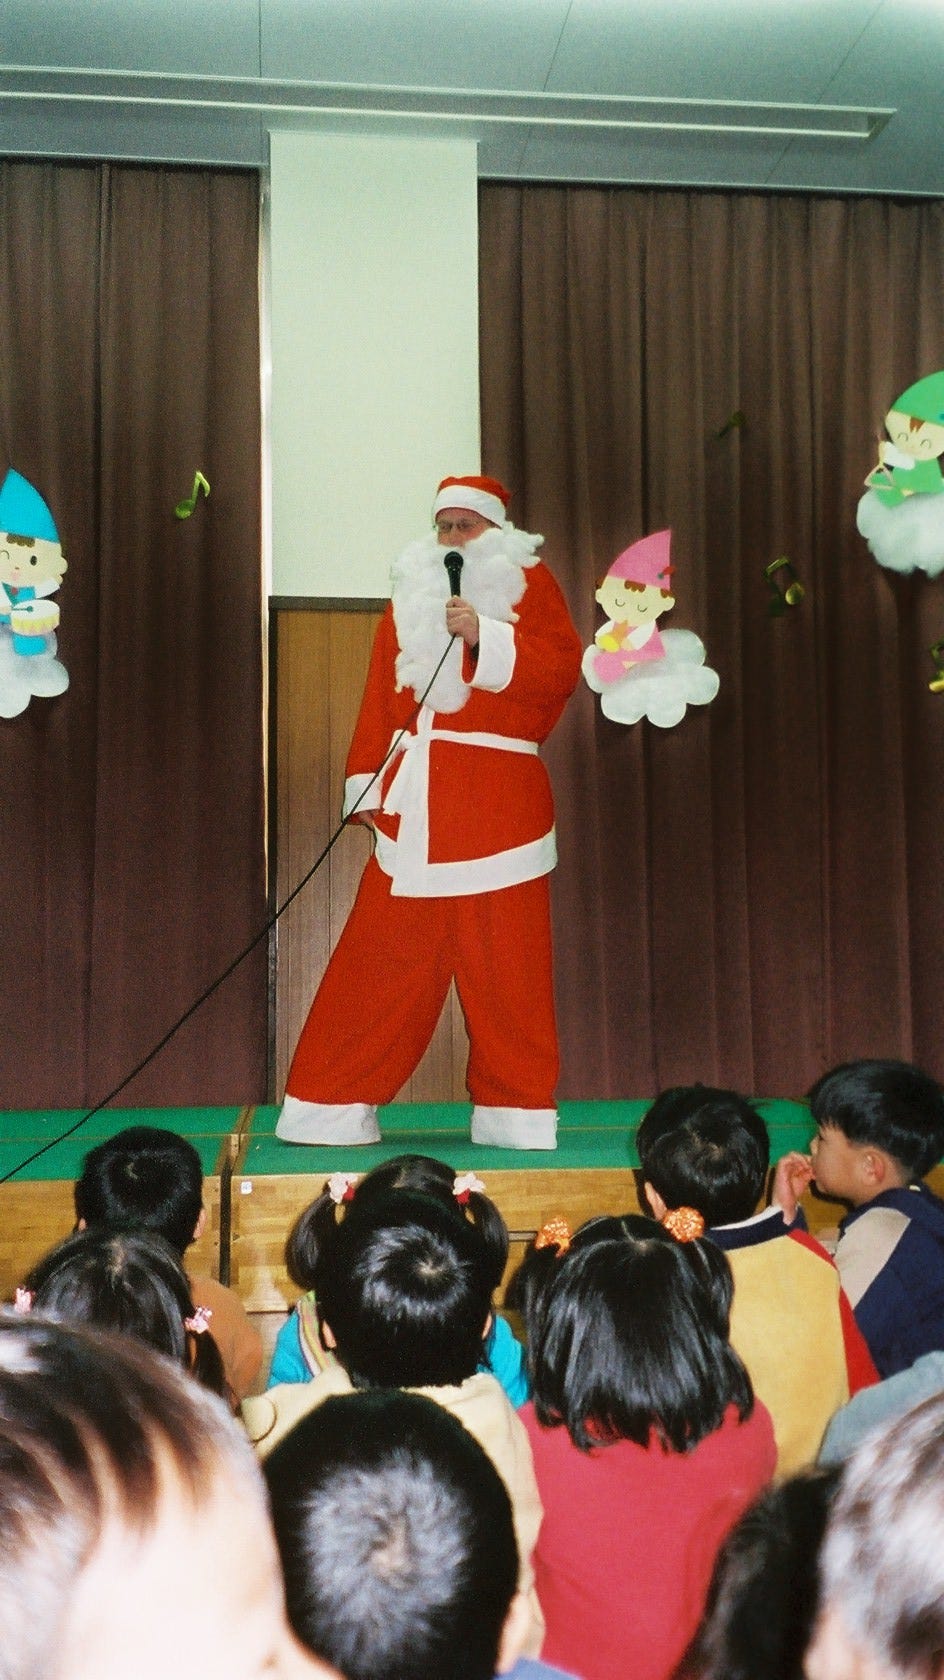 An image of the author dressed as Santa Claus, standing on a stage, with a microphone.